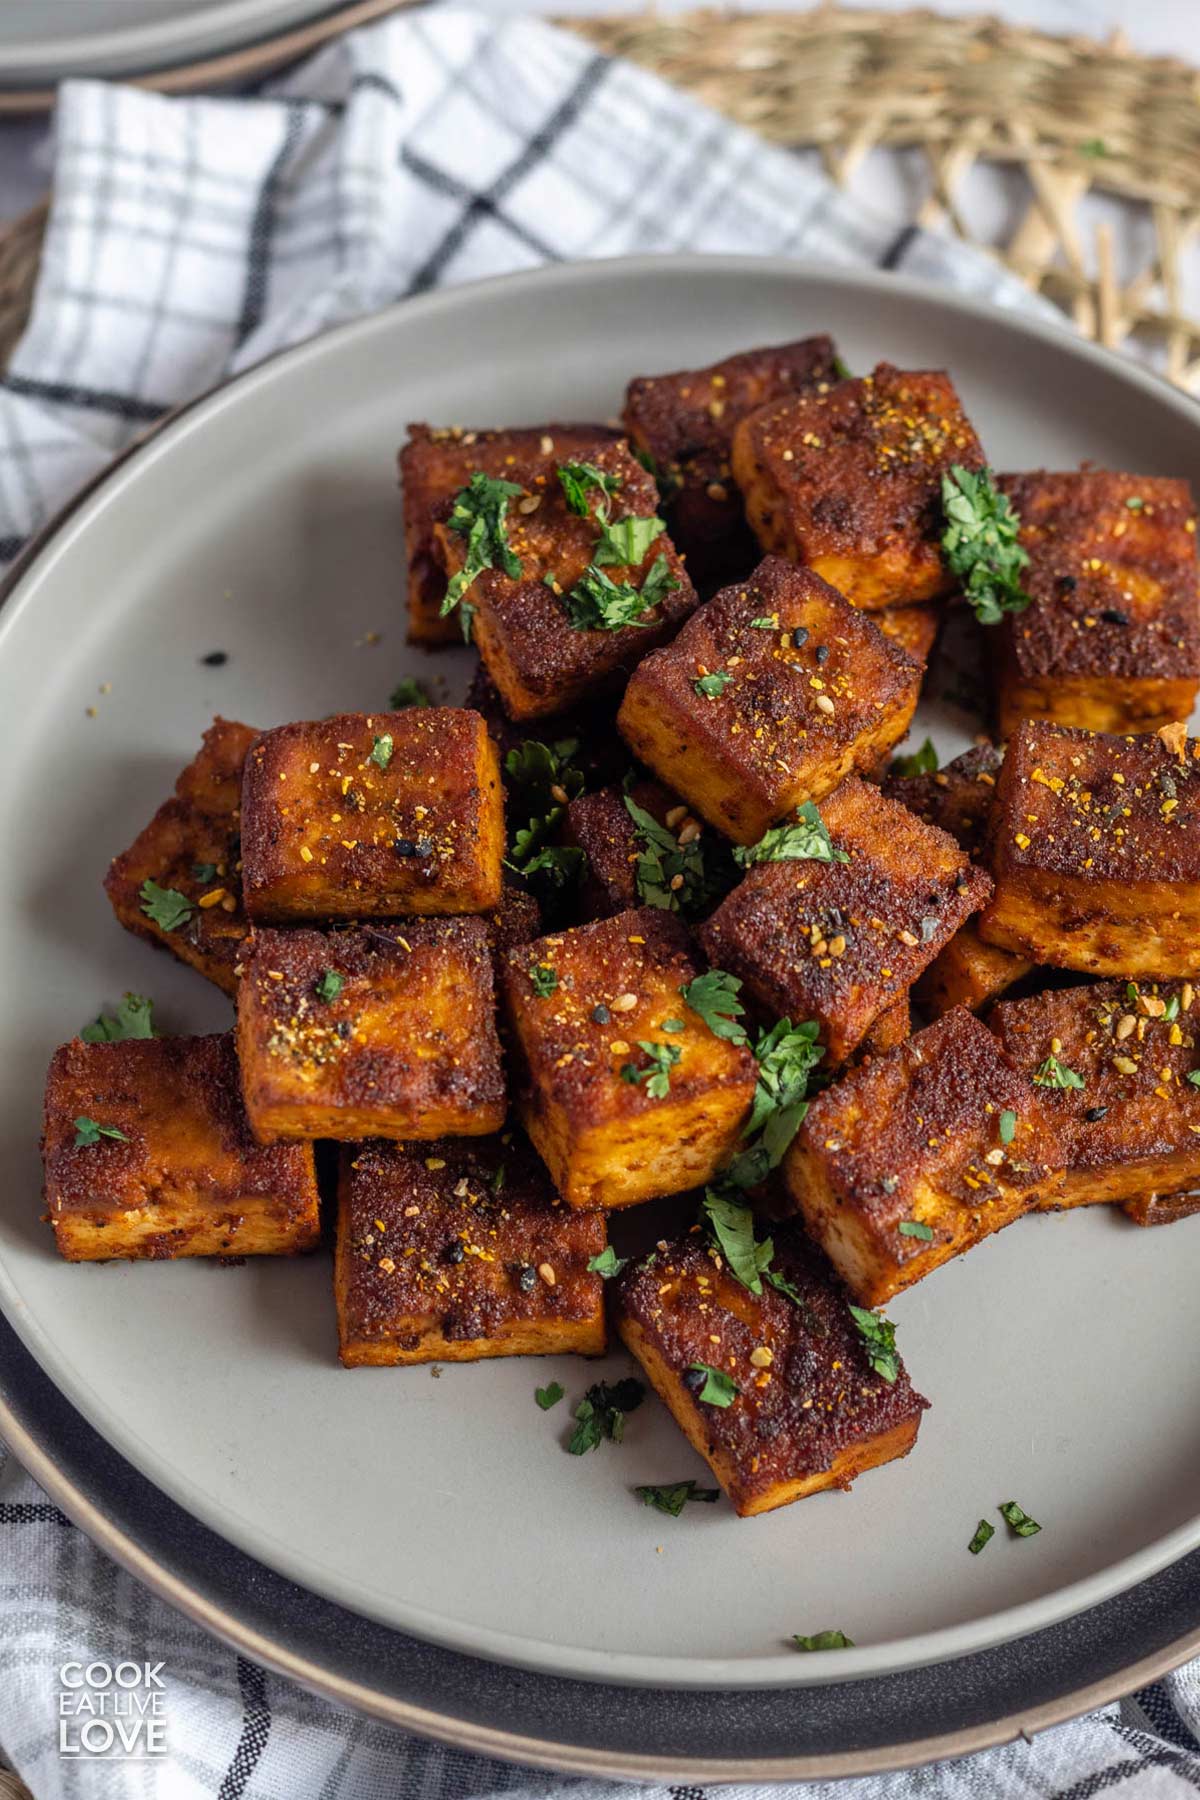 Smoked tofu on a plate garnished with parsley.